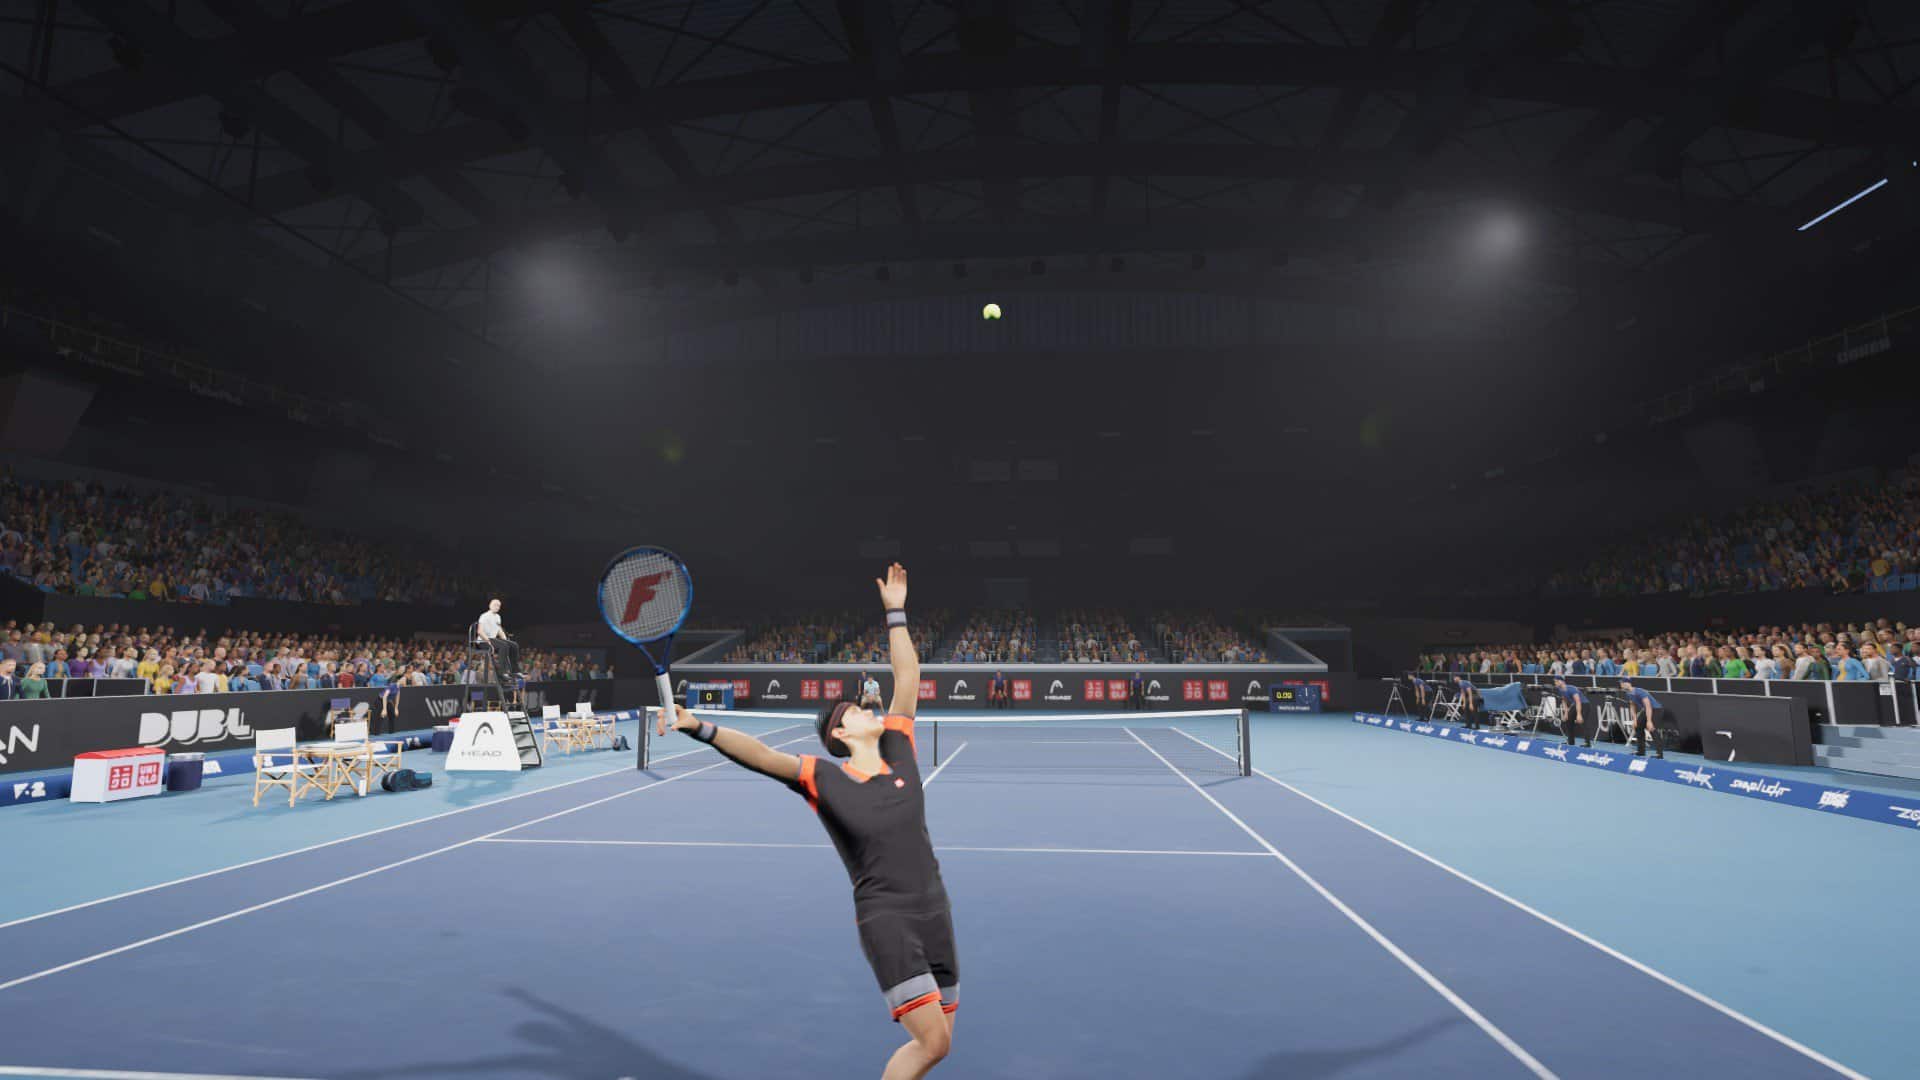 Matchpoint – Tennis Championships is a tennis sim serving up this Spring on PC and consoles